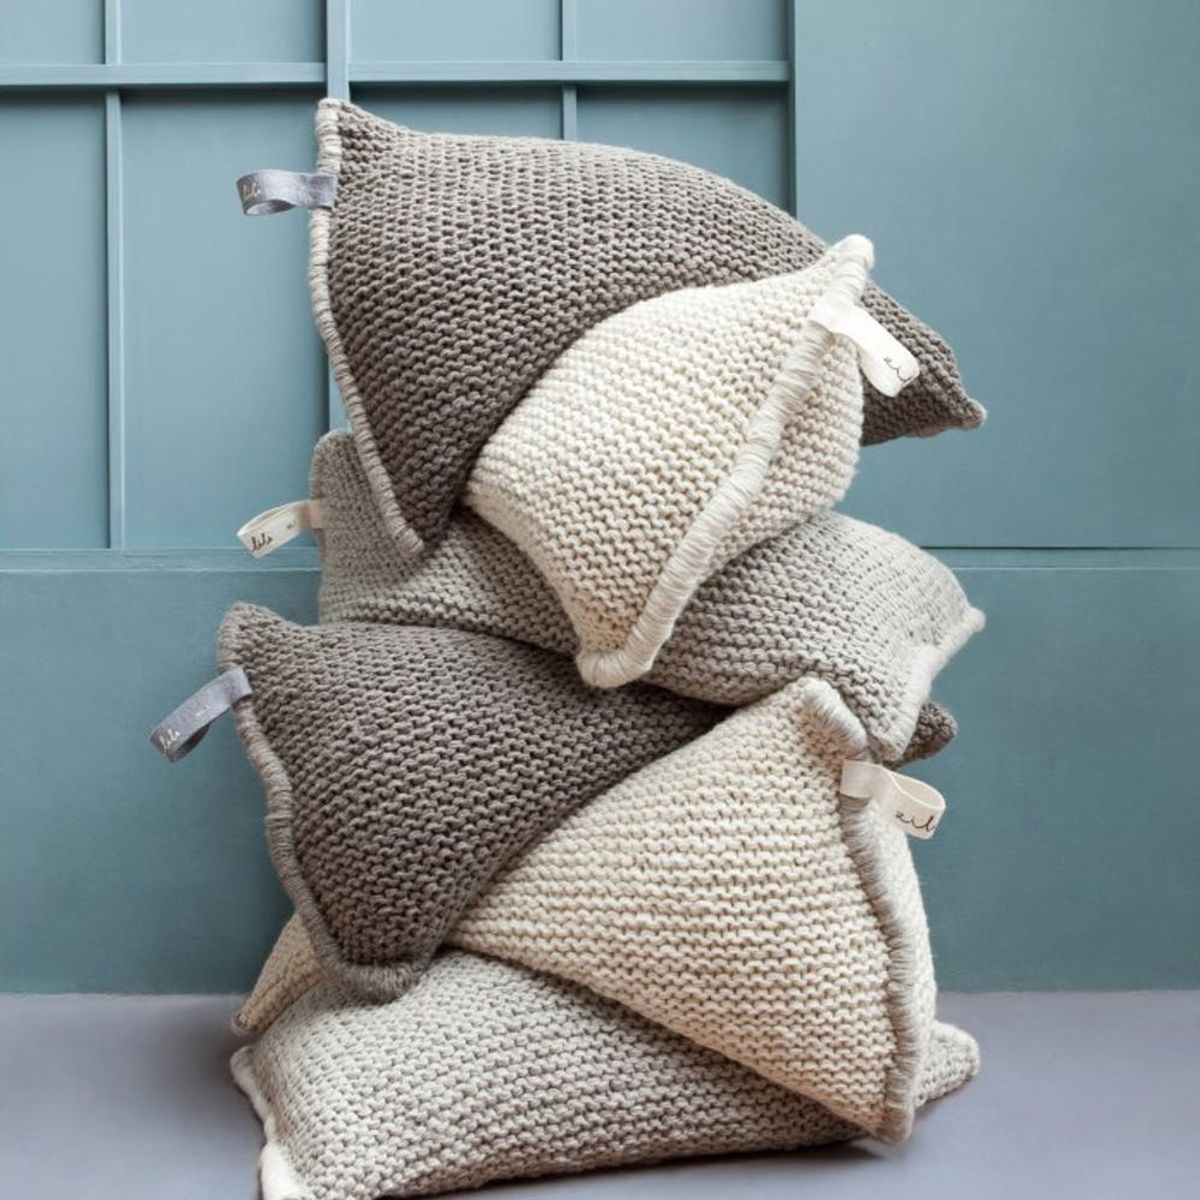 Hand-Knit Beanbag Chairs Are the Stylish *and* Cozy Furniture You NEED